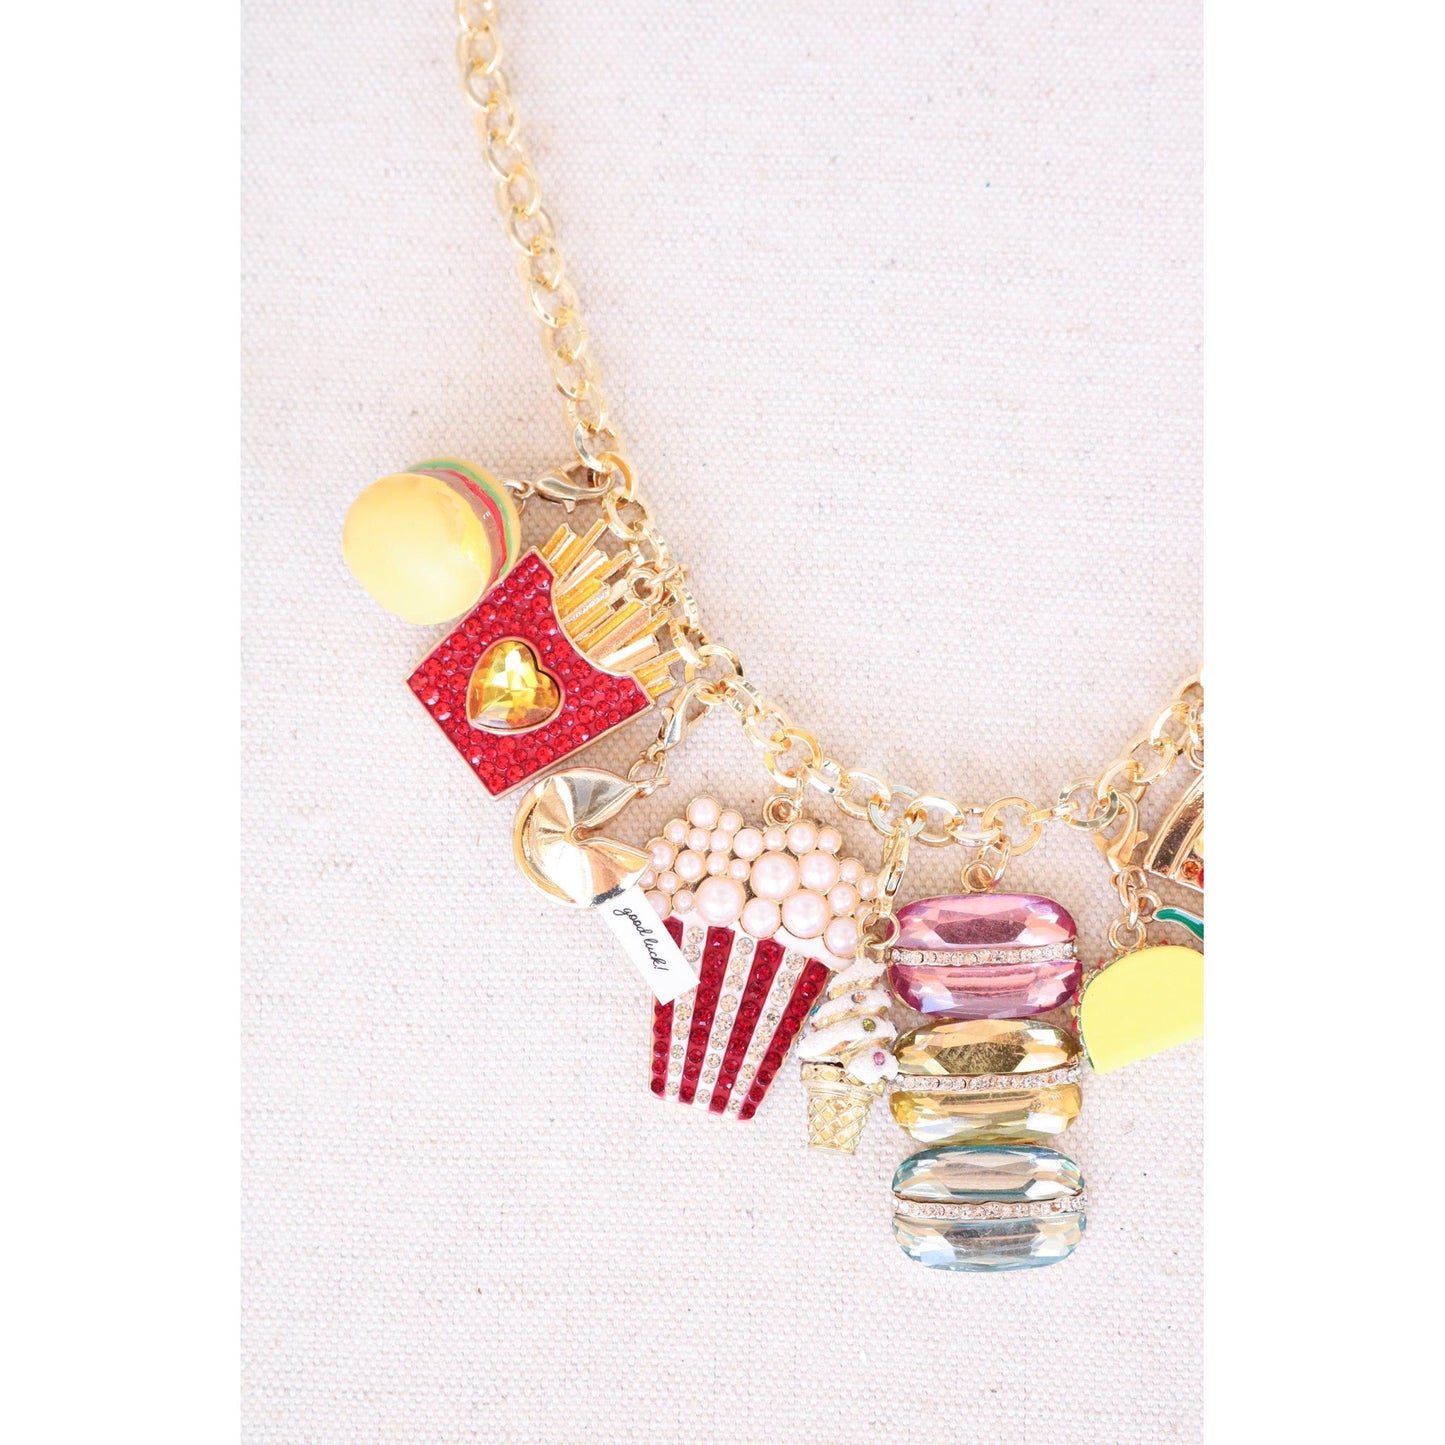 Concession Stand Charm Necklace